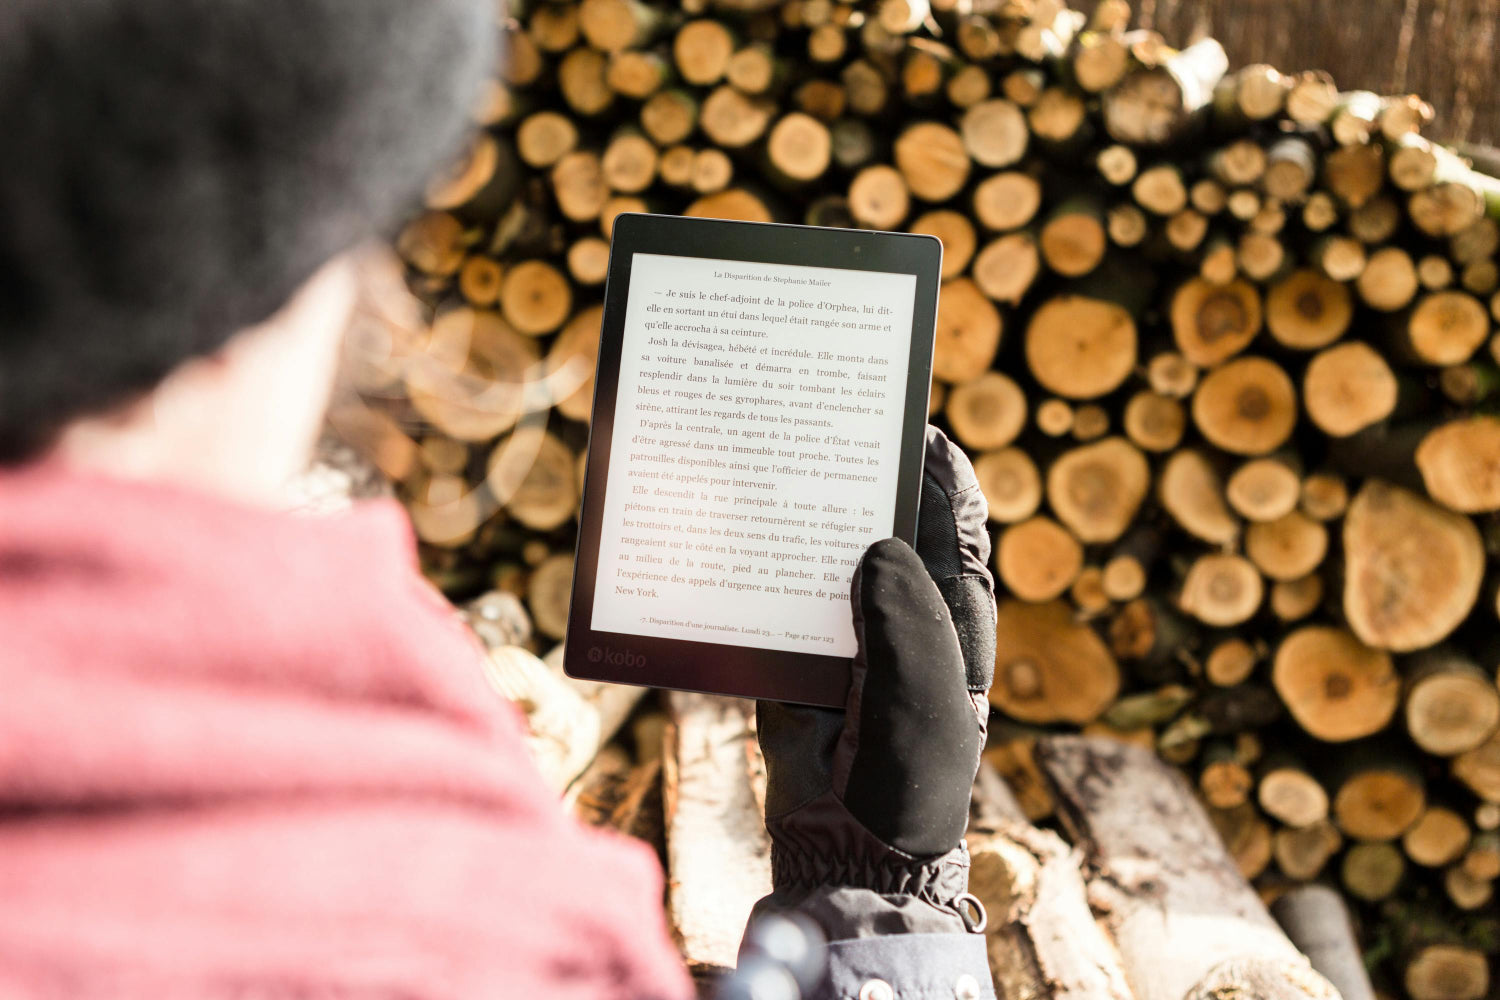 A person reads an ebook in front of a wood pile